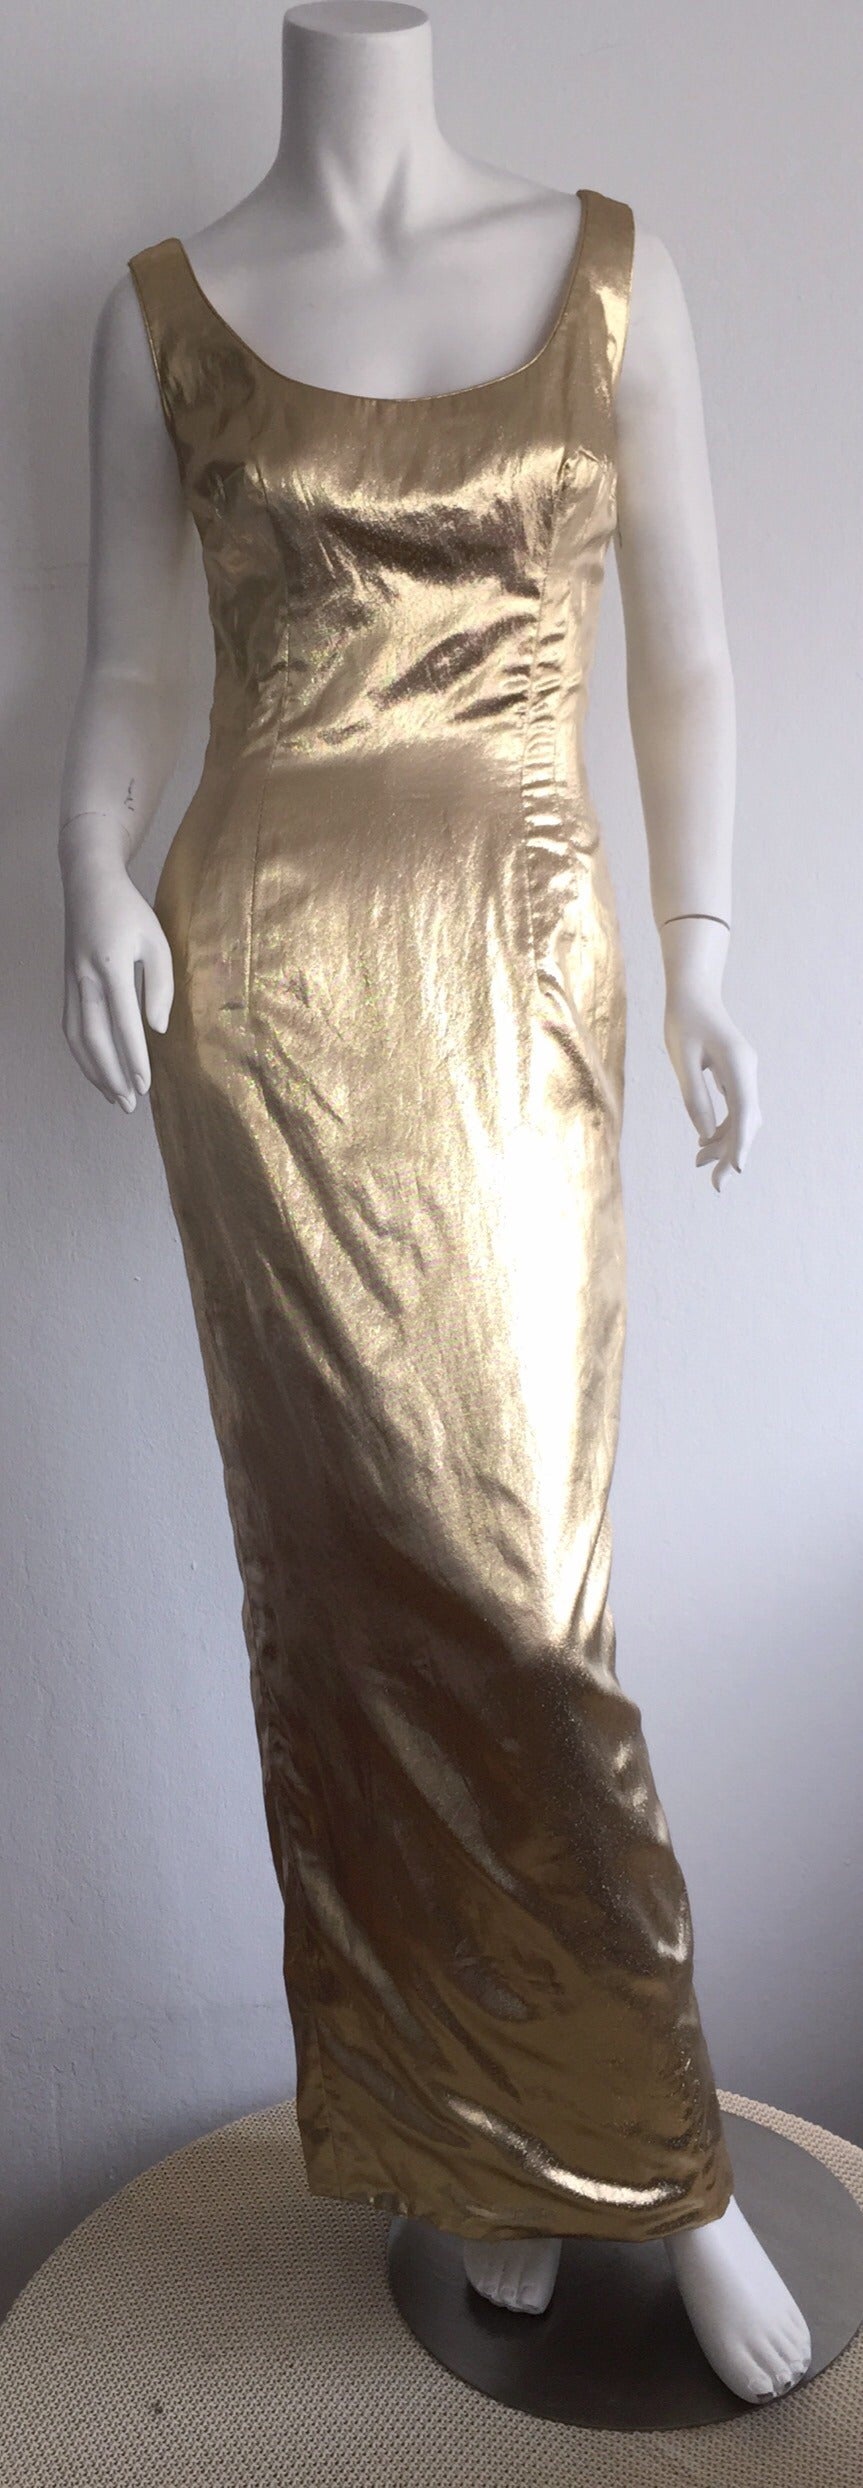 WOW! This vintage Mr. Blackwell Custom dress is OUT OF THIS WORLD! This is quite possible the best Mr. Blackwell piece I have ever seen! Dating from the late 1950s/ early 1960s, this dress is the epitome of sophisticated sexy! Perfect wiggle fit,